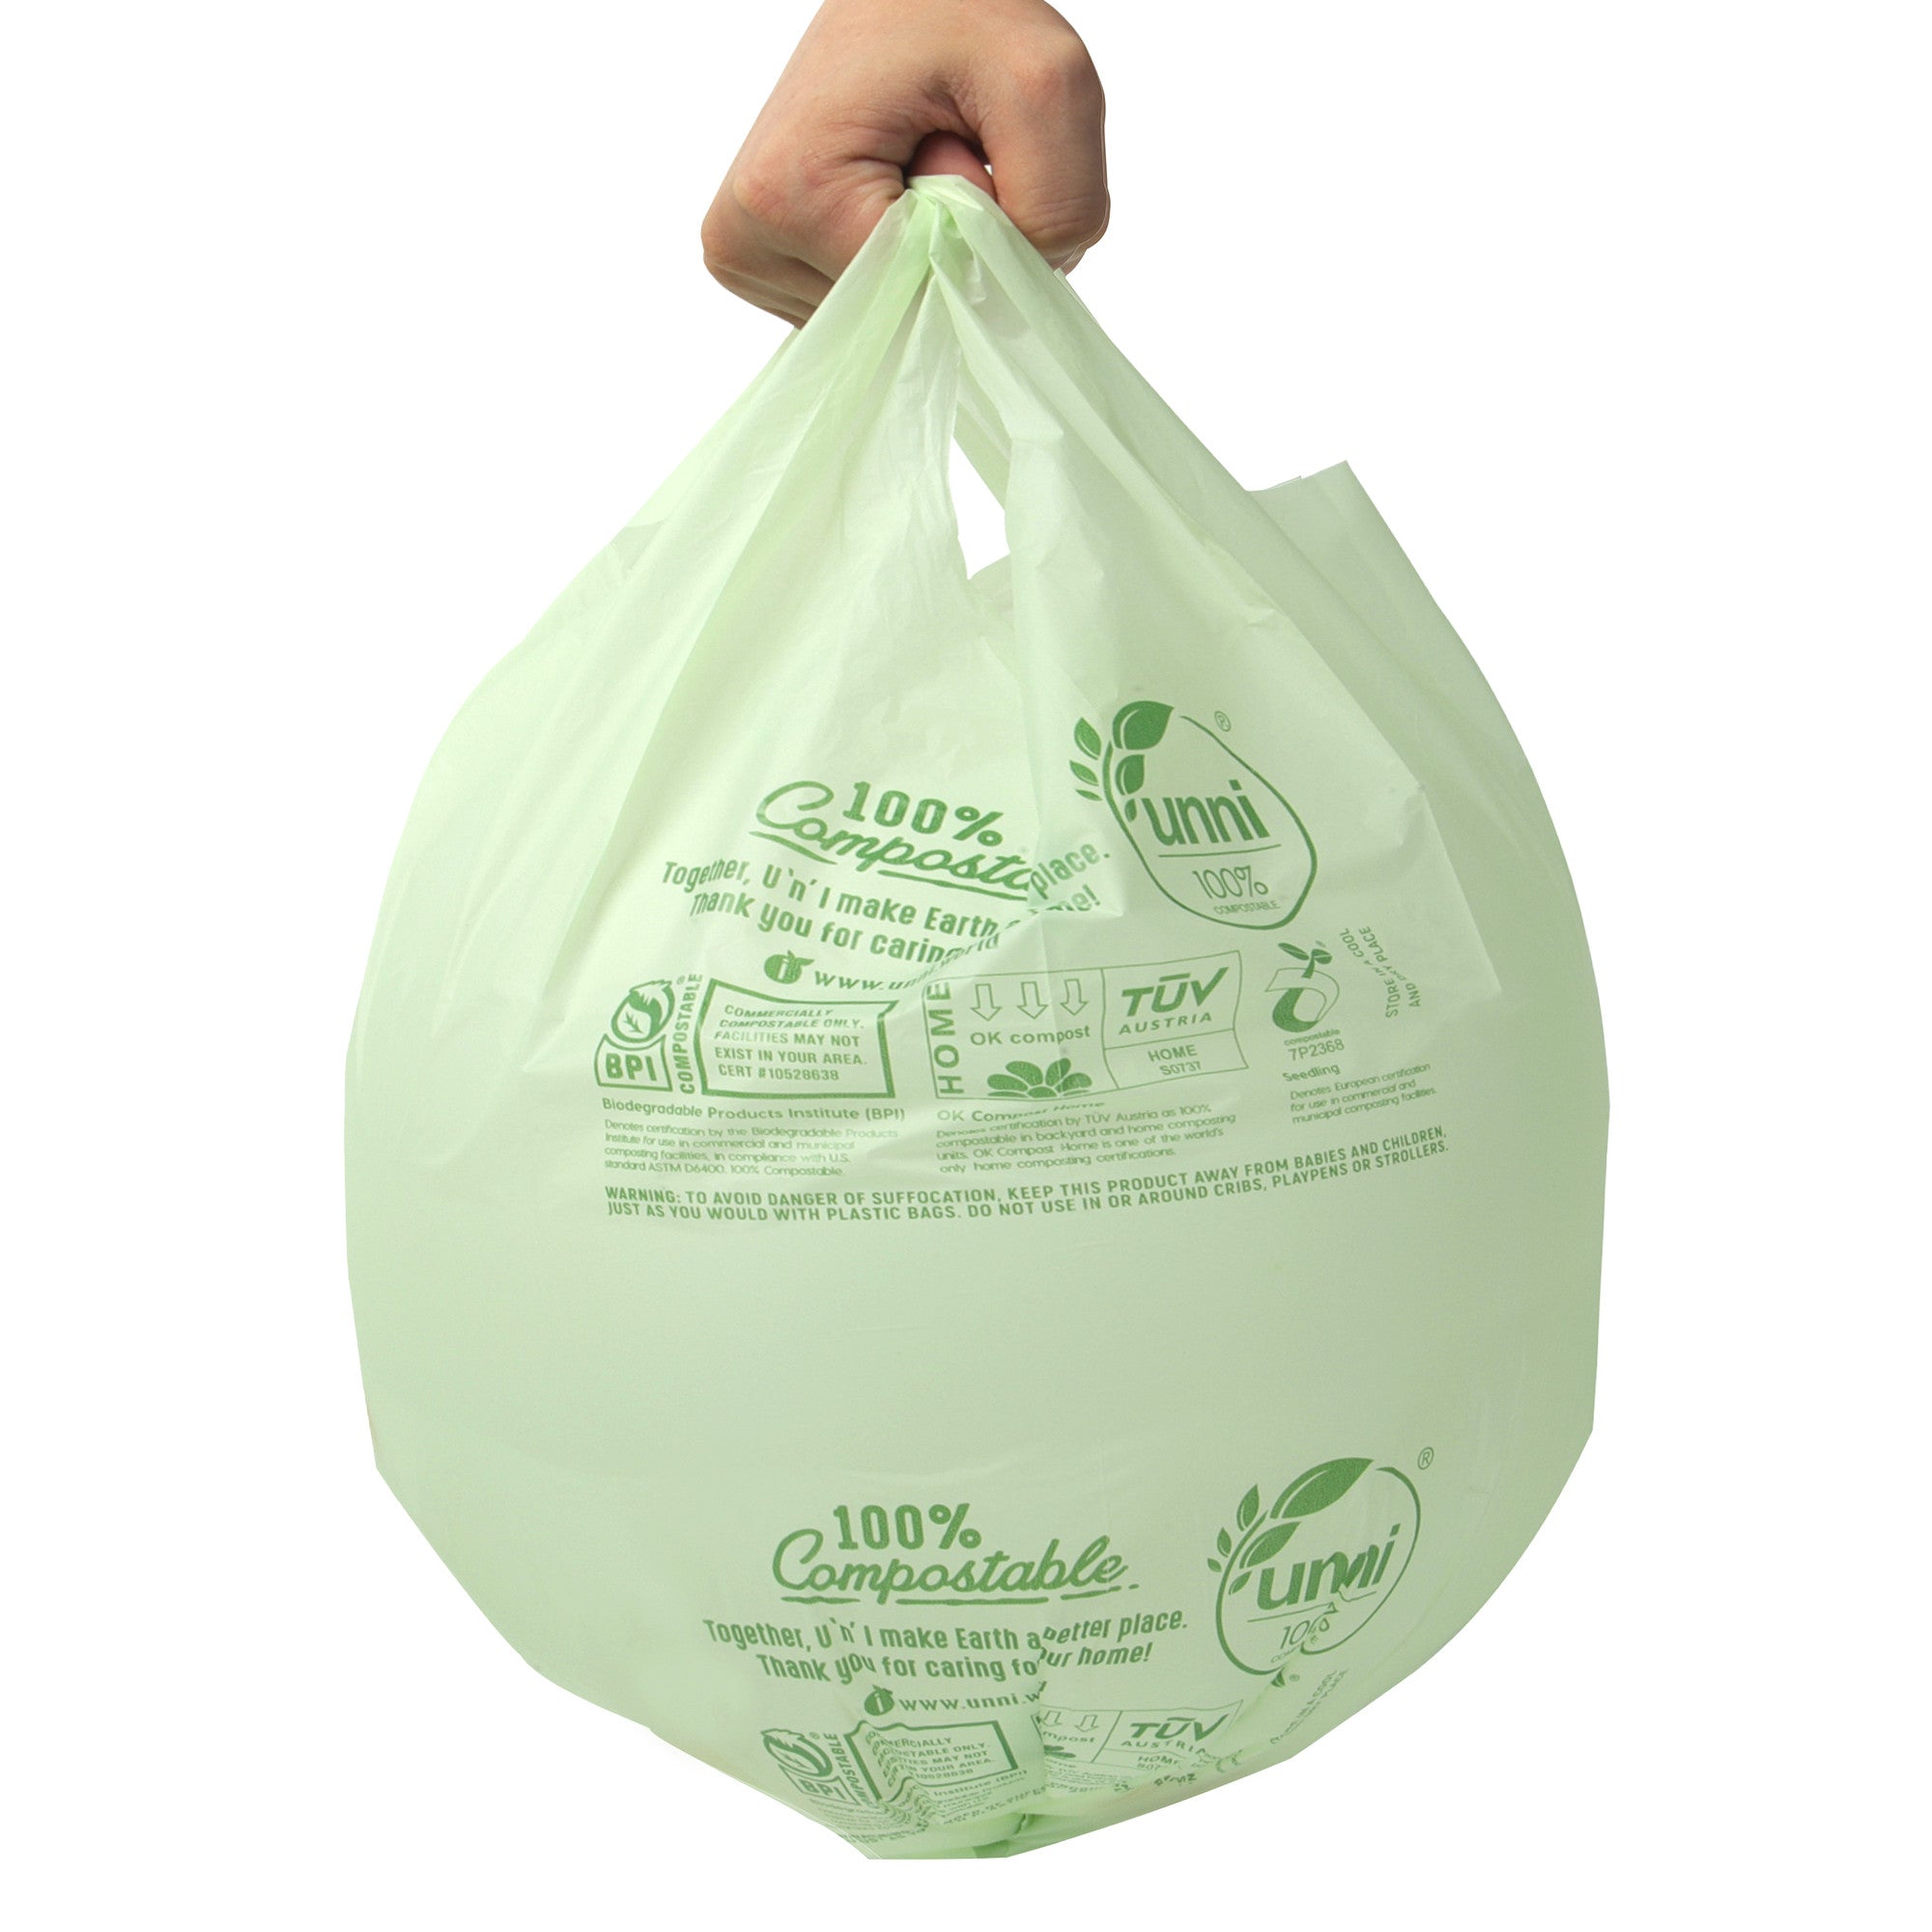 3 Gallon, 11.35 Liter, Compostable Bags with Handles